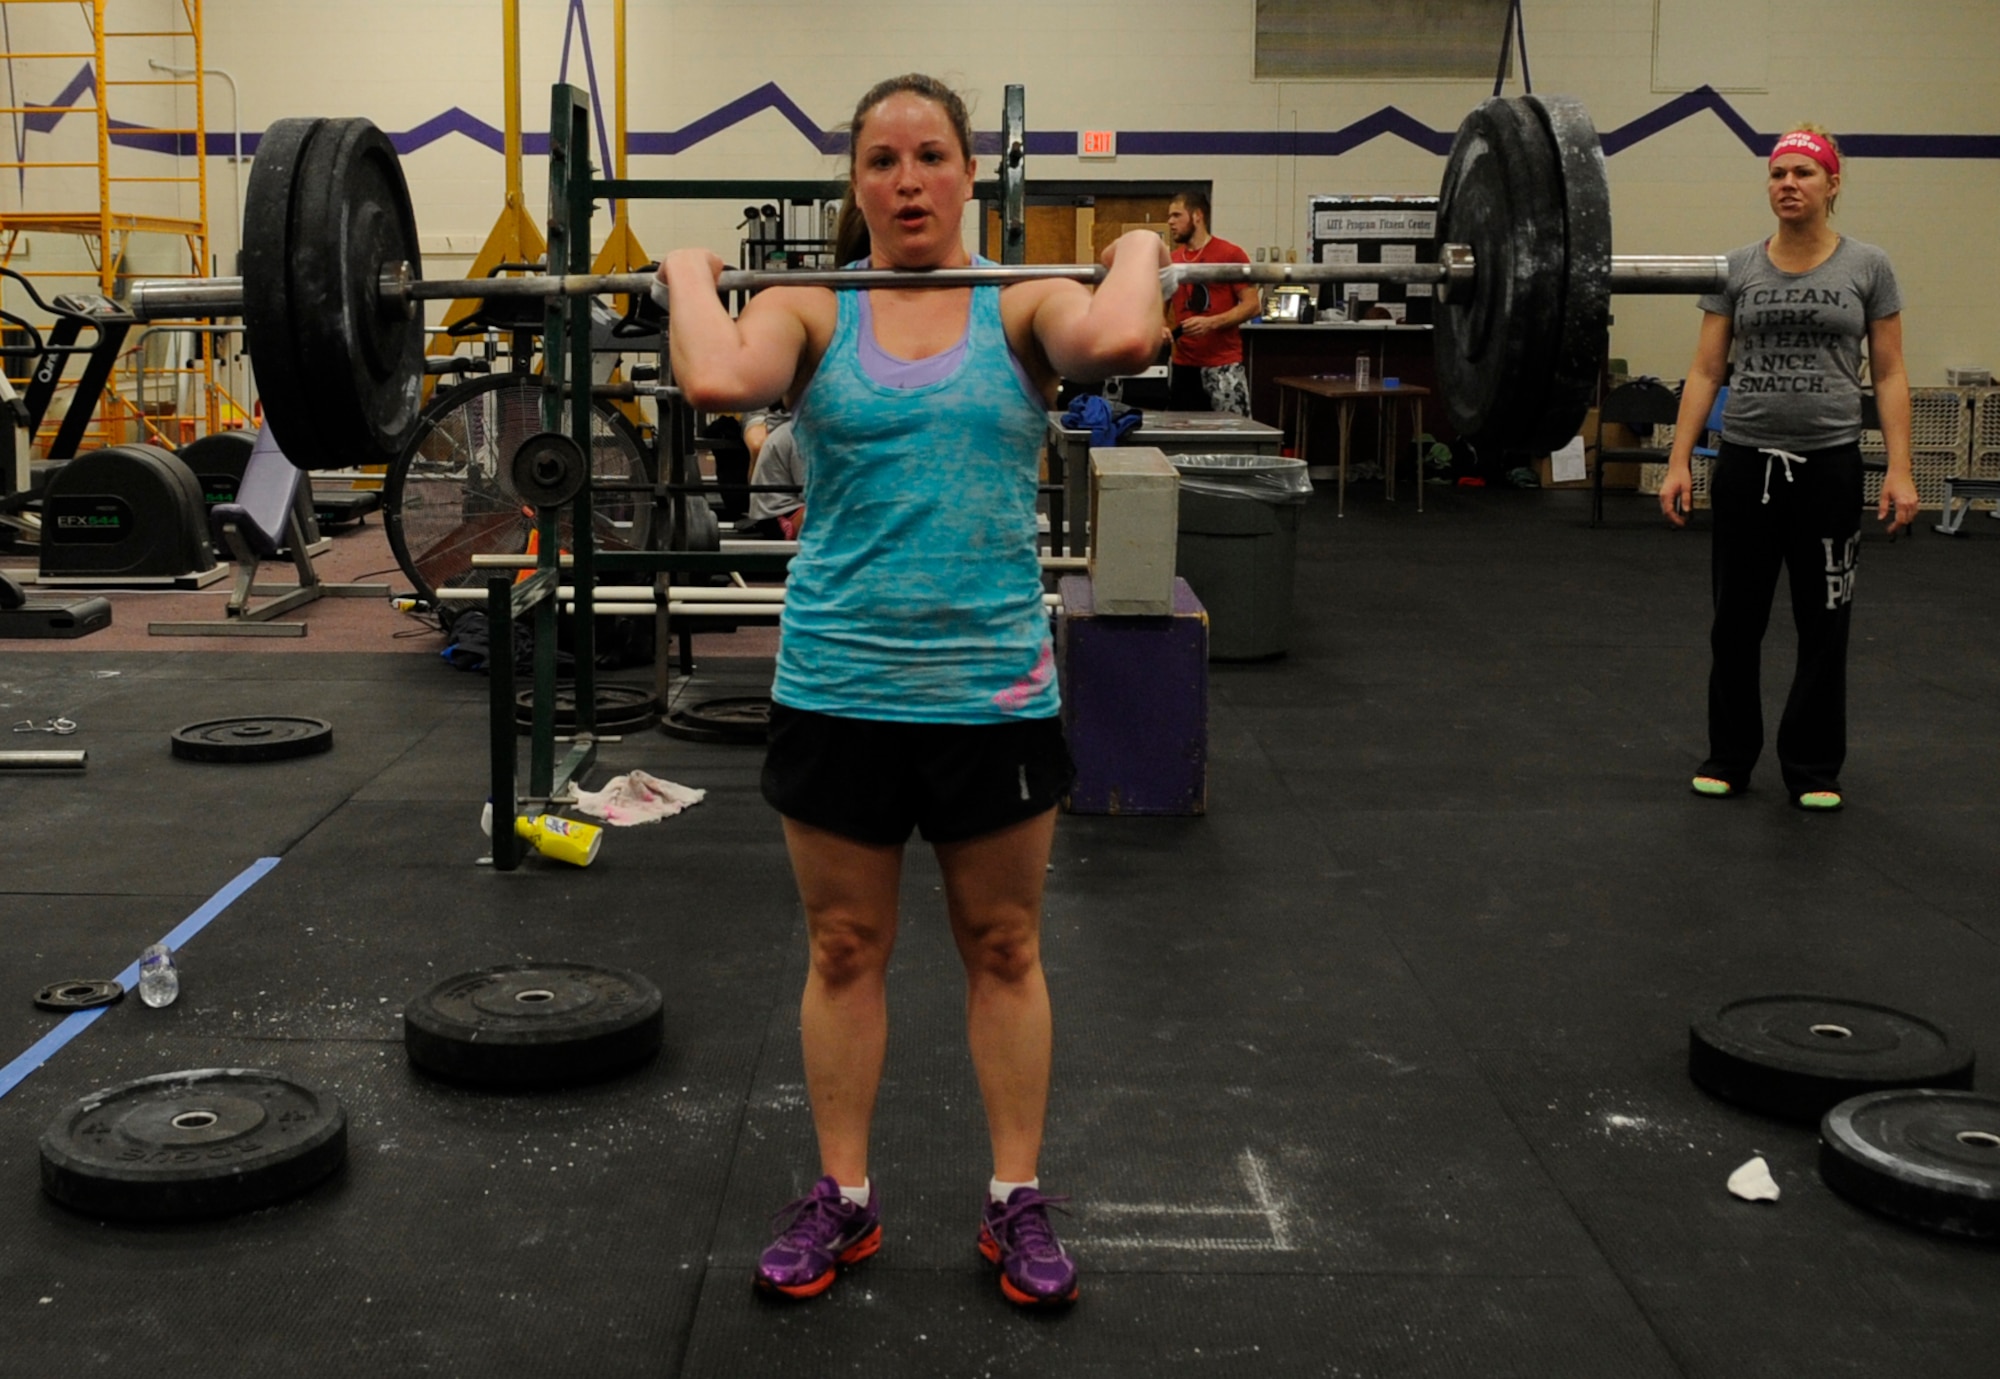 Staff Sgt. Samantha Scott, 509th Bomb Wing Command Post training manager, performs a max clean deadlift as her last event in the K-State CrossFit Challenge in Manhattan, Kan., April 27, 2013.  She placed third overall in the women’s scaled division.  (U.S. Air Force photo by Staff Sgt. Alexandra M. Boutte/Released)